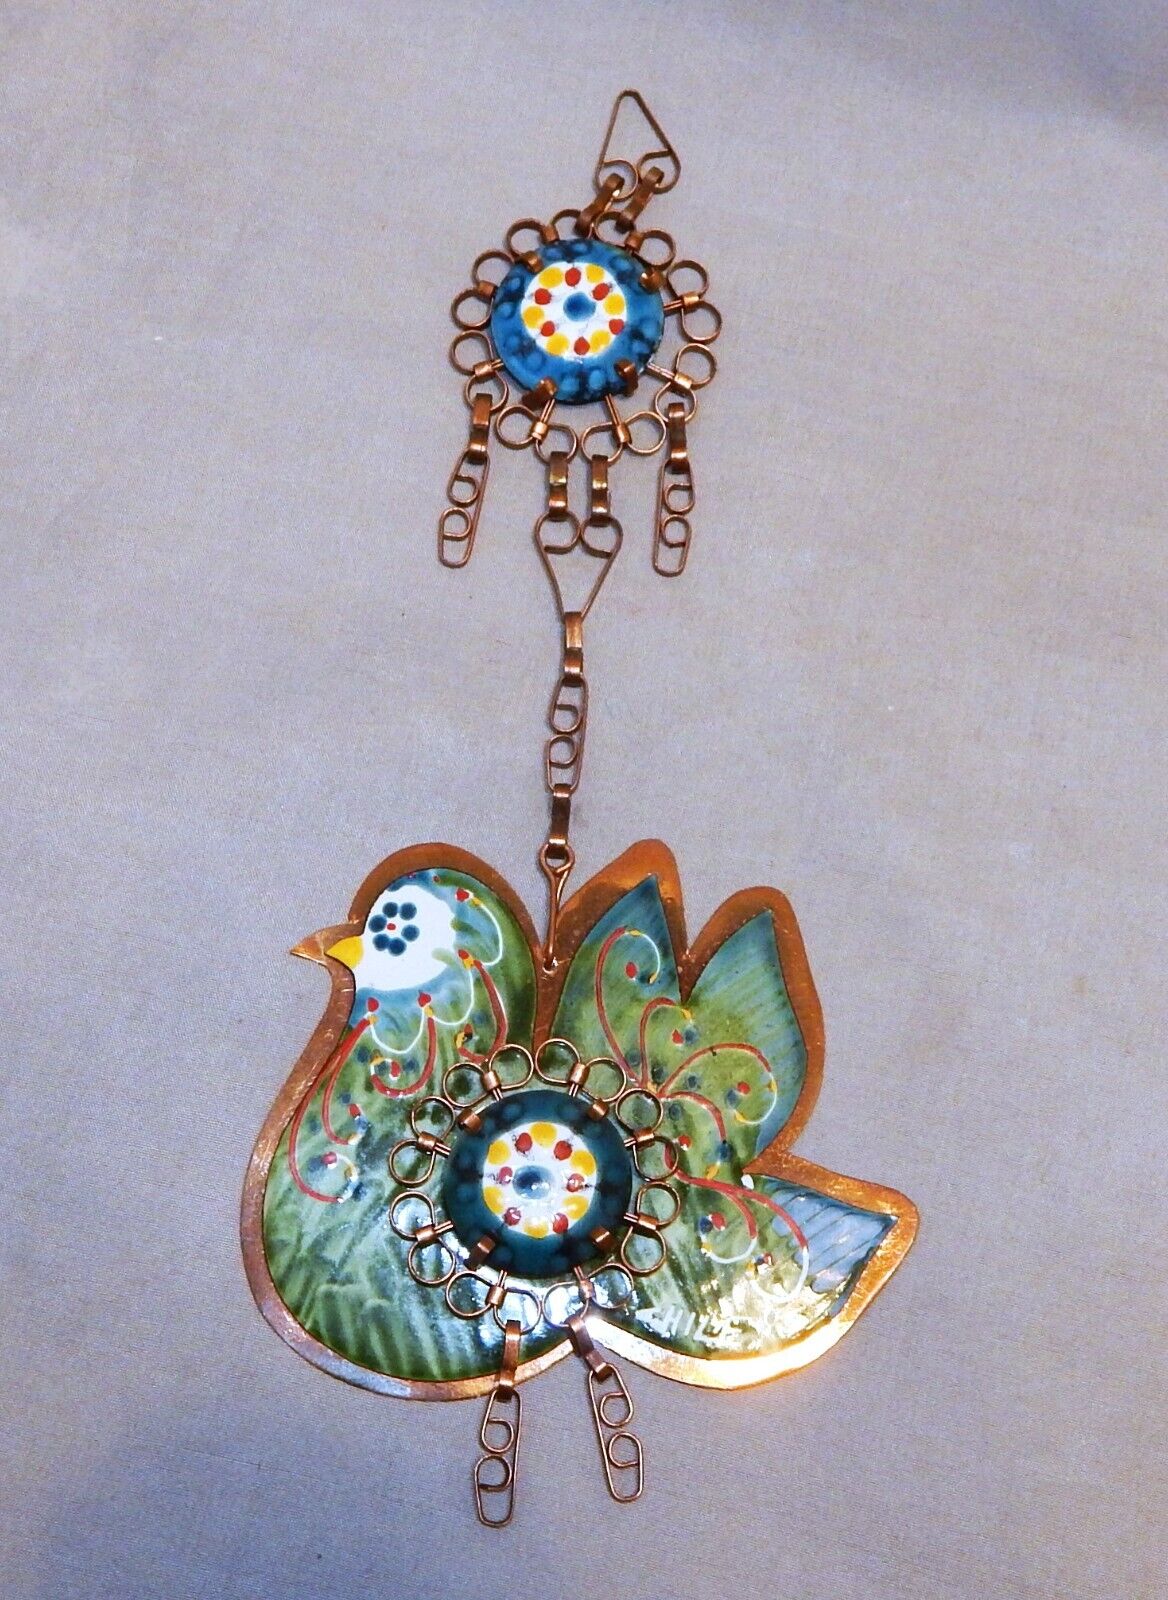 Made in Chile Enamel on Copper Bird Ornament